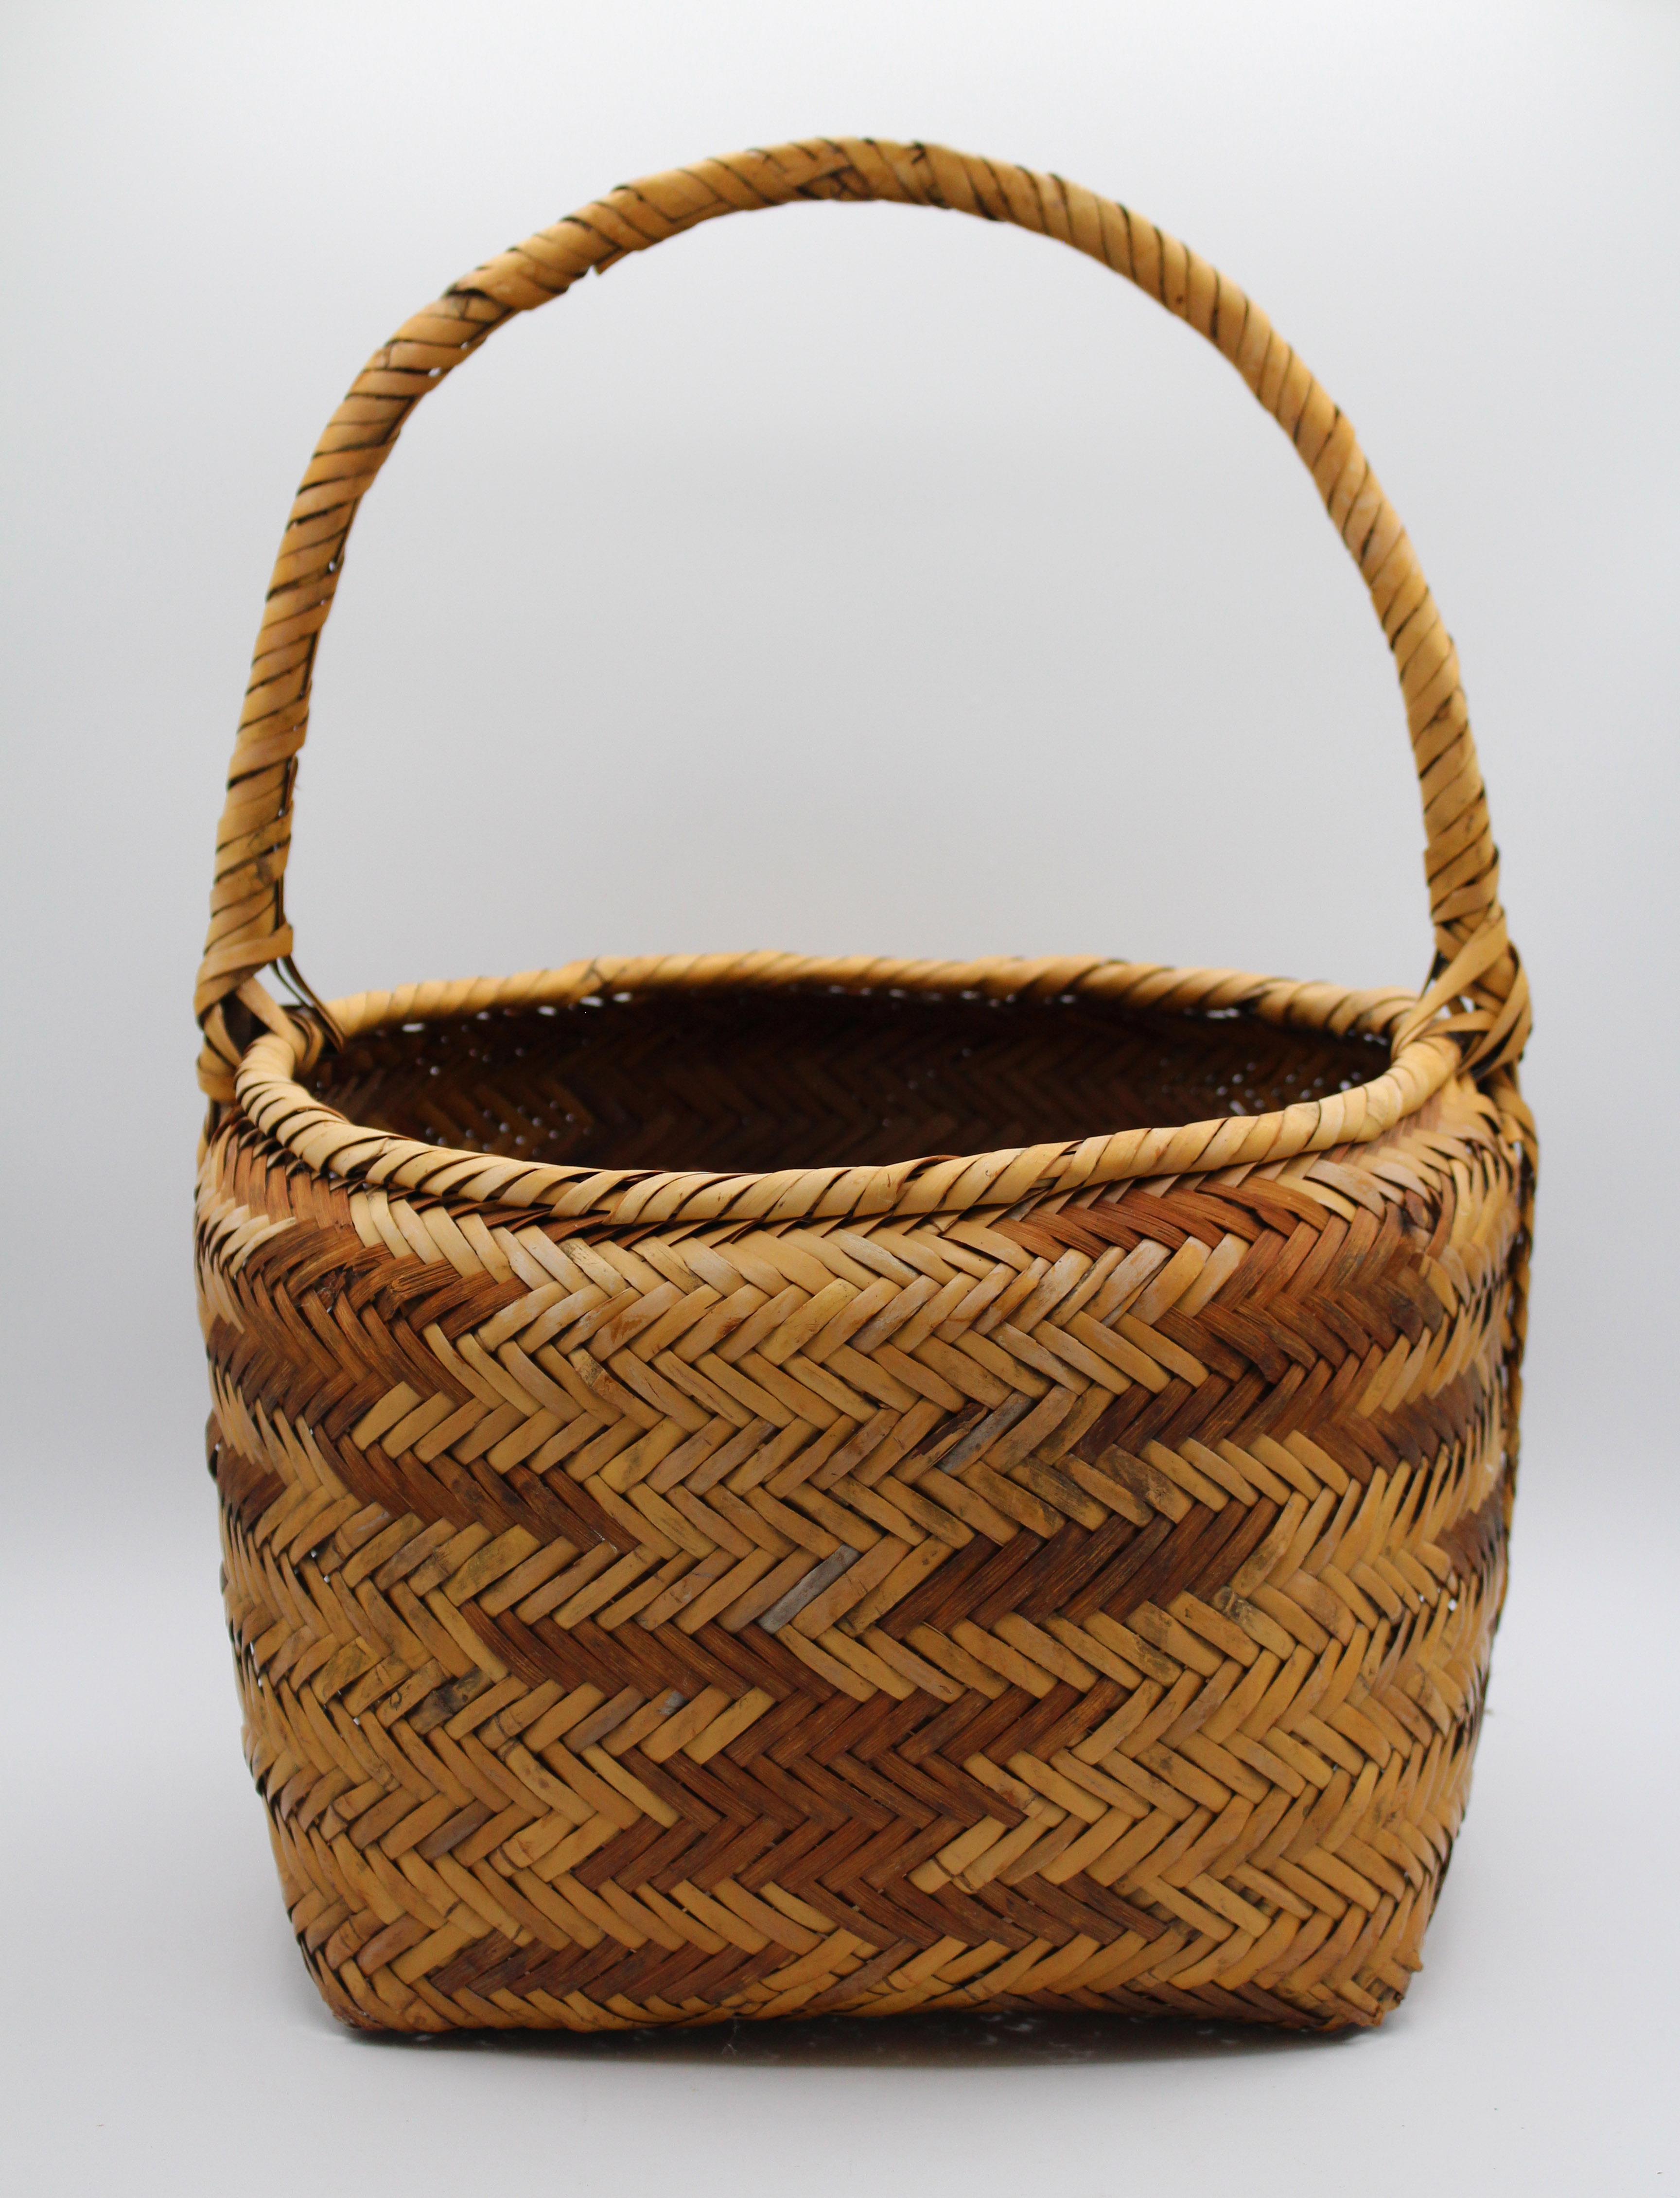 Early 20th century Choctaw Native American gathering basket. Various colors of river cane. Very good condition with minor bottom corners with wear & tiny losses commensurate with age & use. Provenance: Estate of Katharine Reid, former director